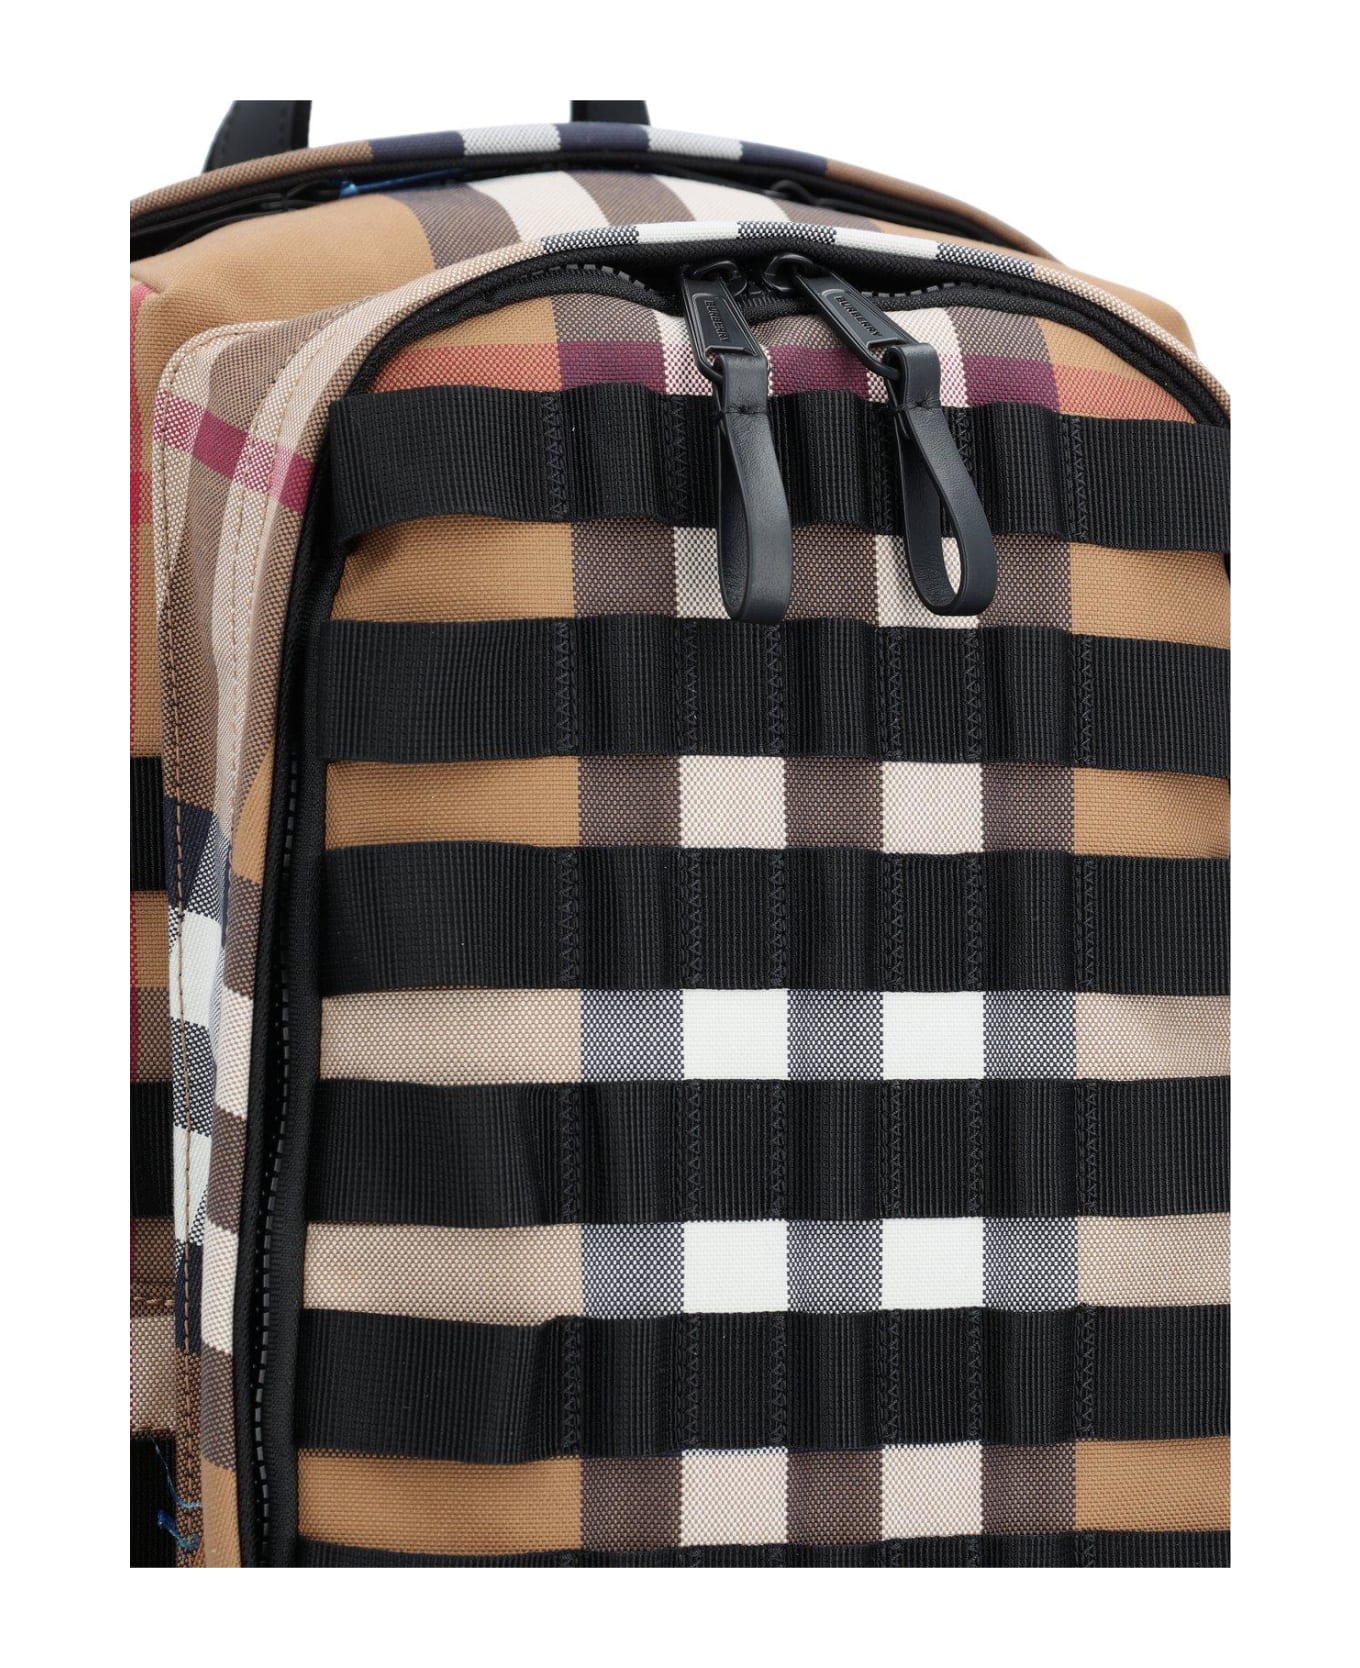 Burberry Rockford Checked Zipped Backpack - Birch brown check